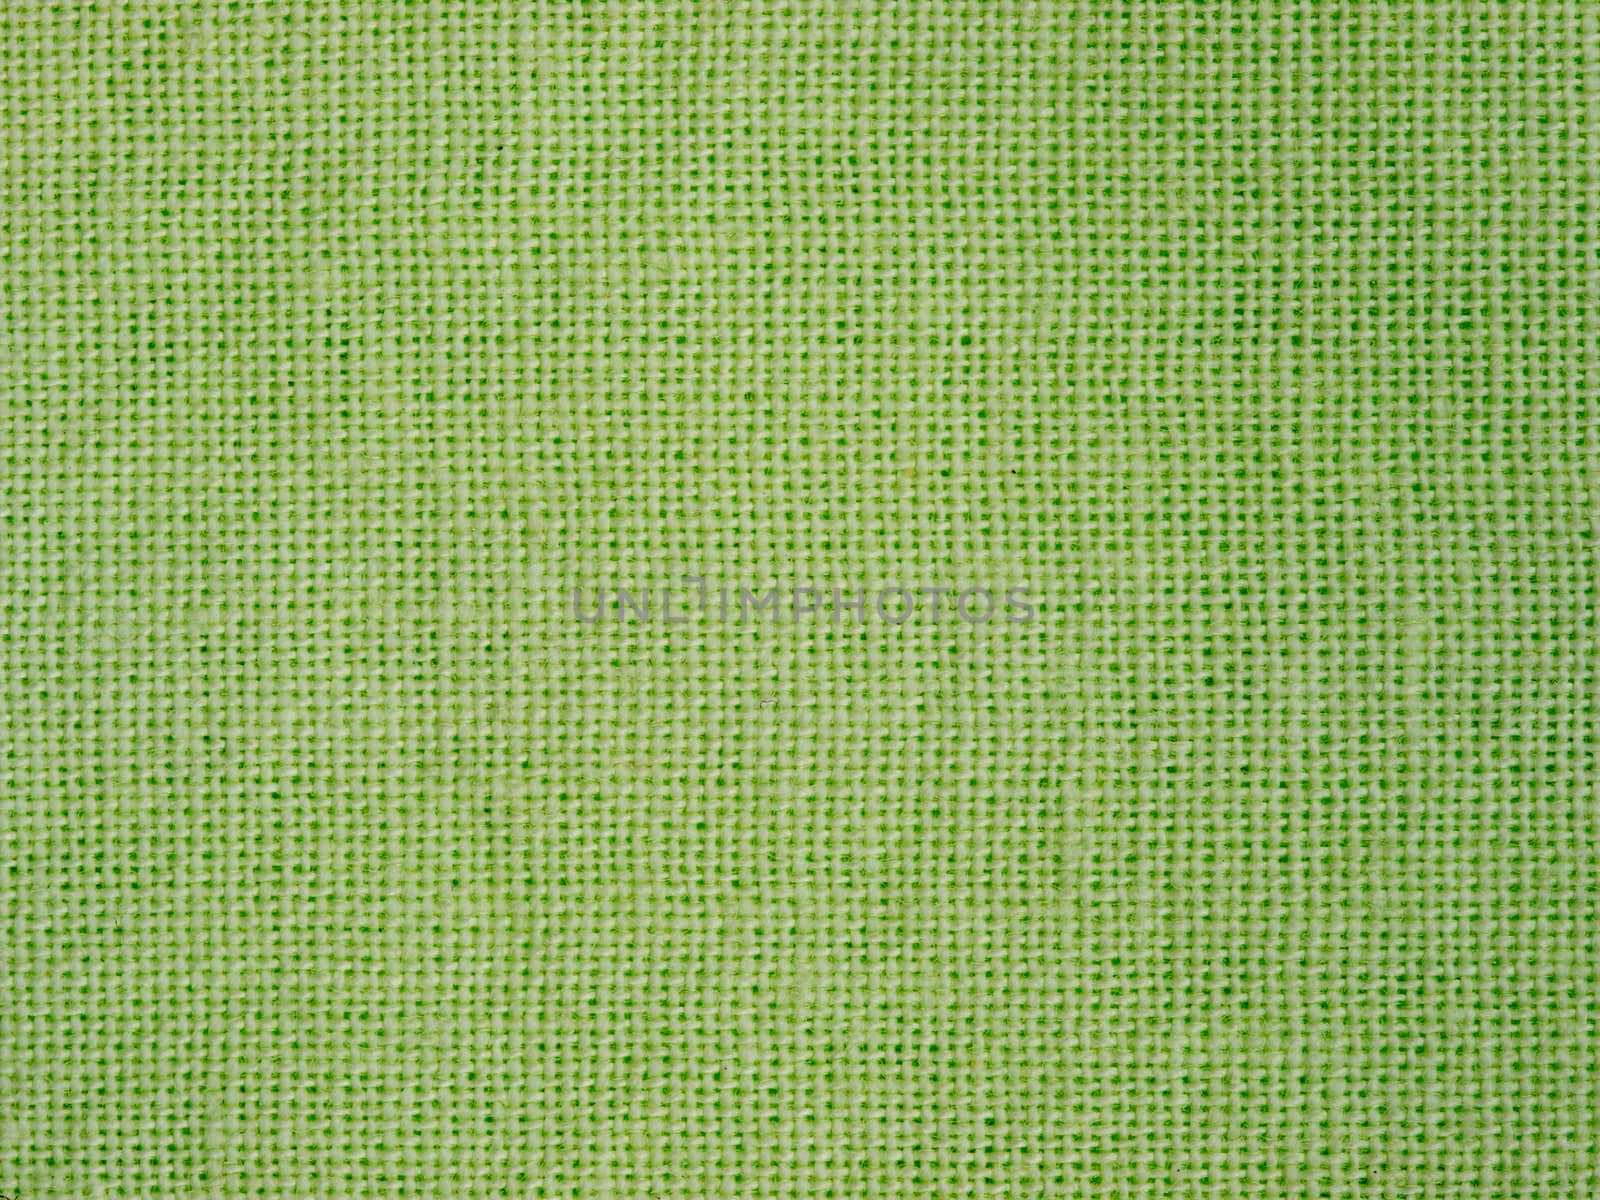 Natural green fabric weaving as background texture by fascinadora